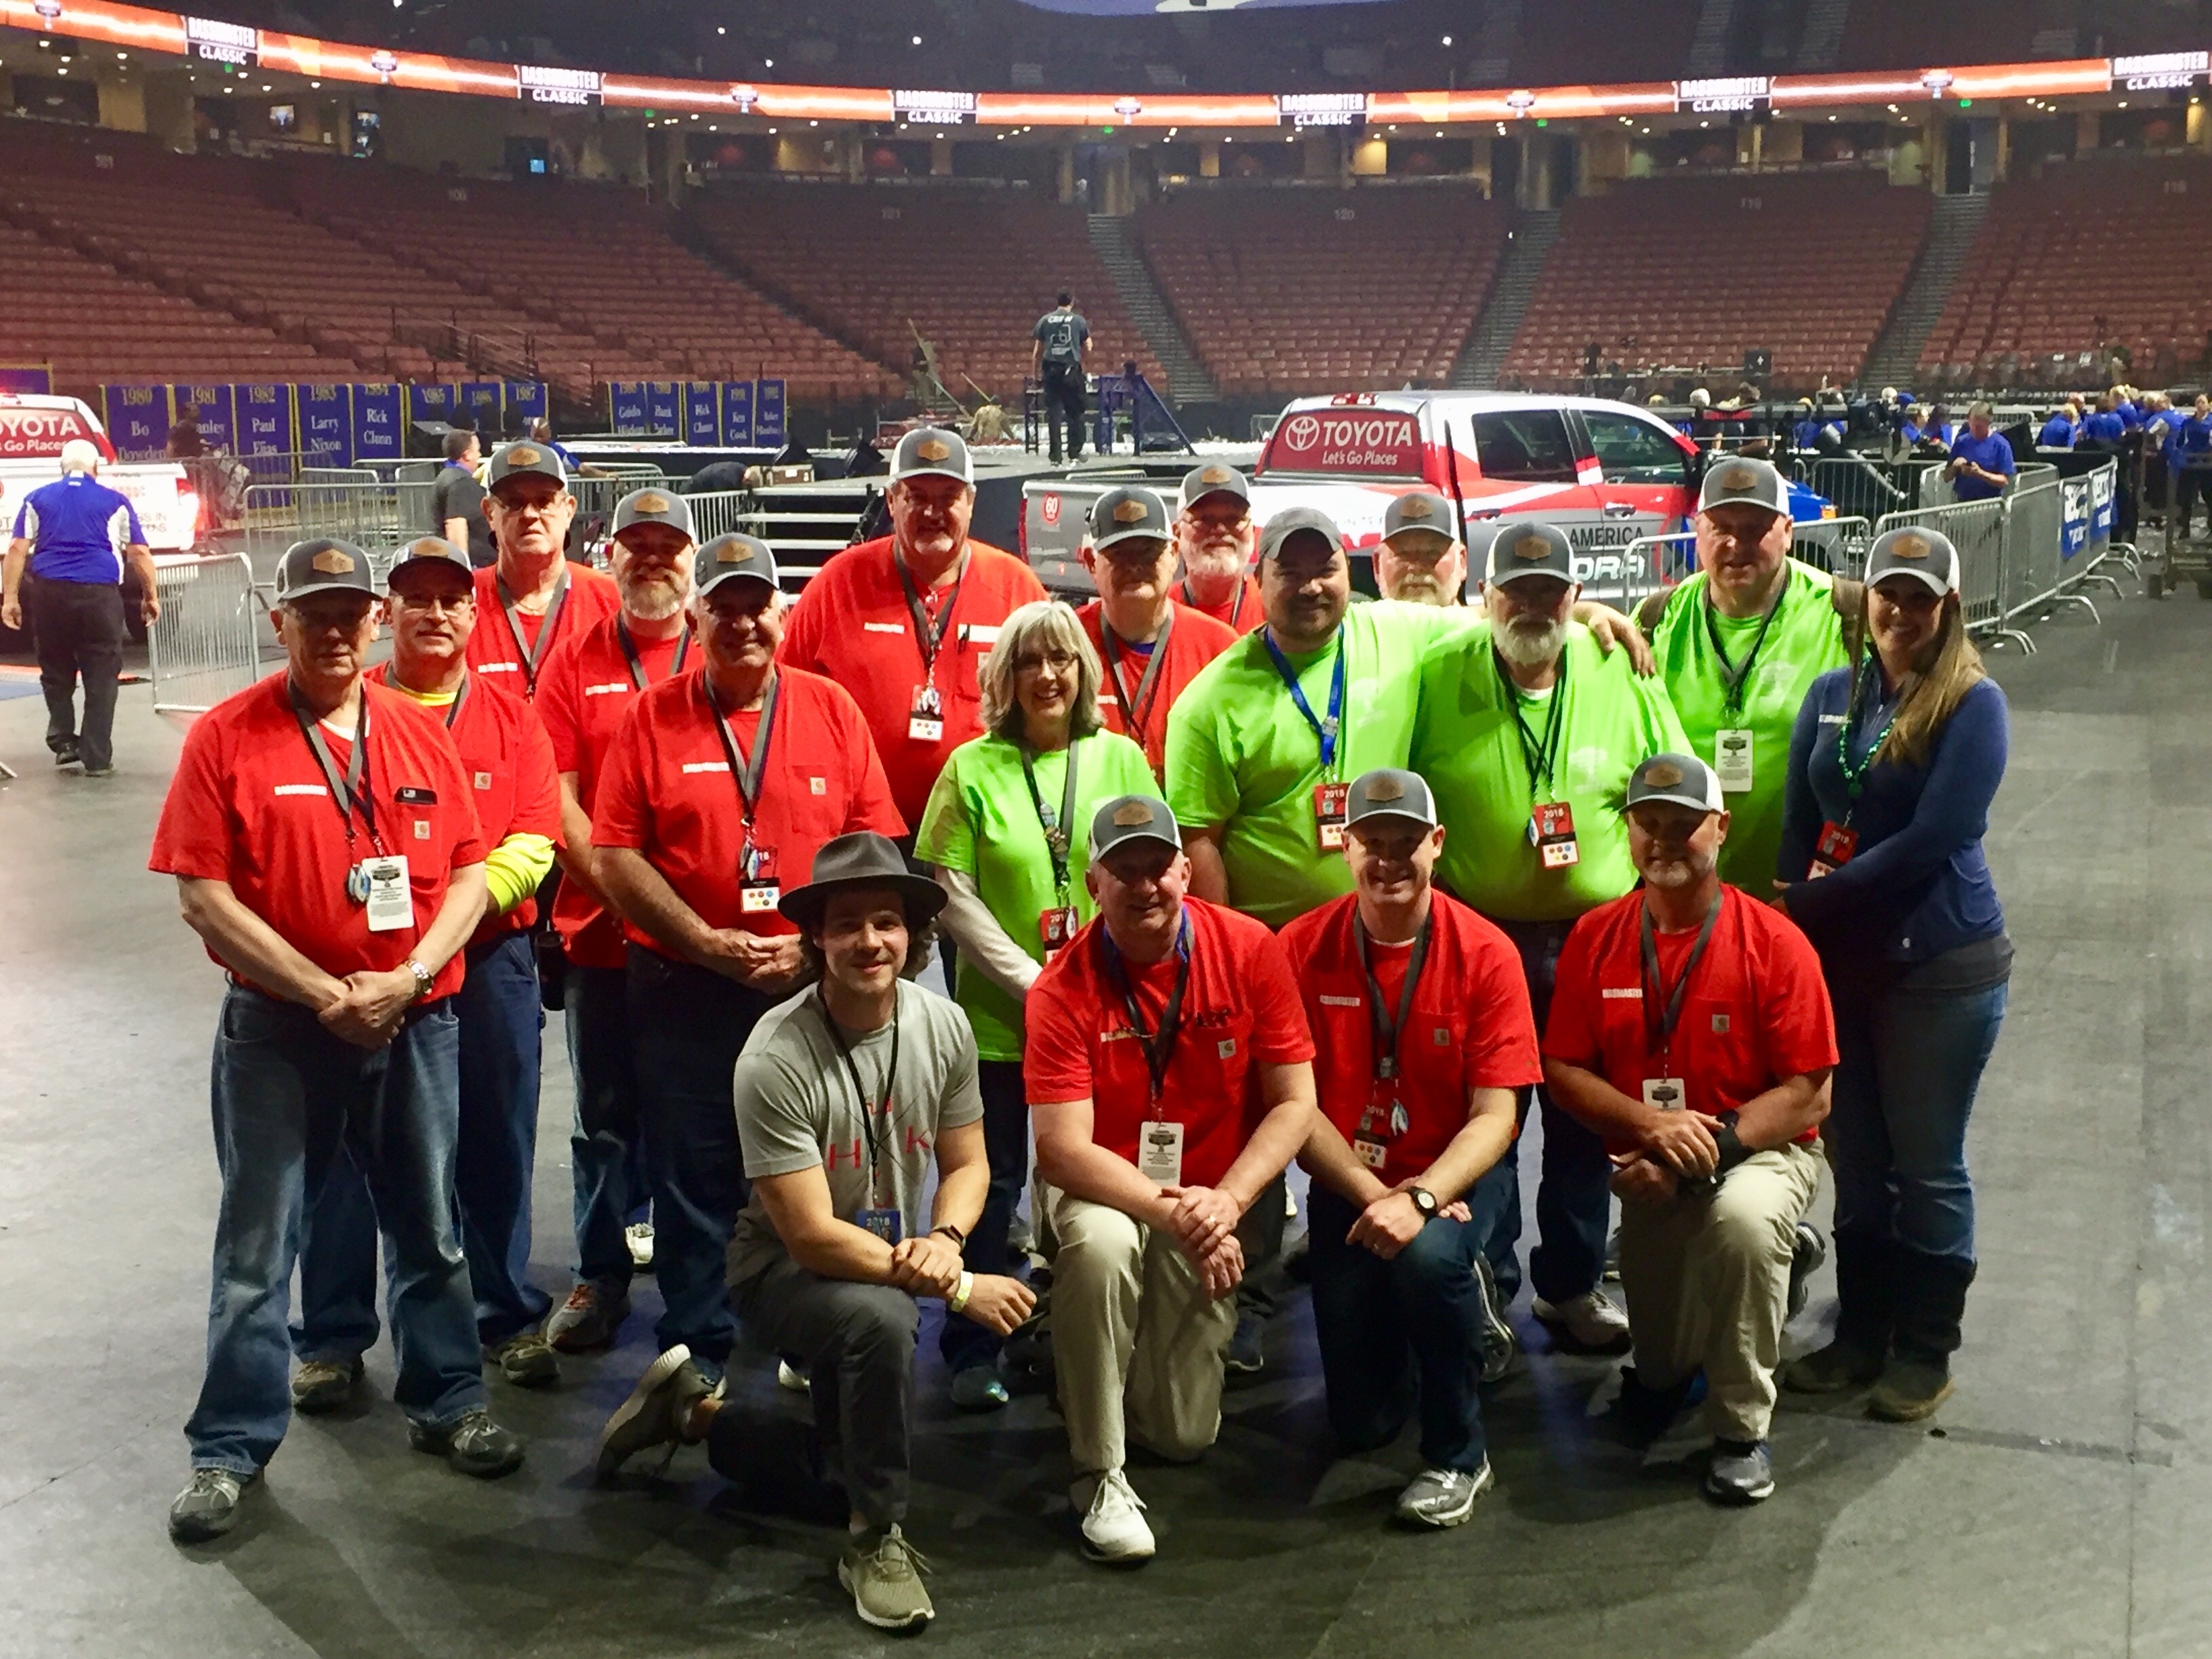 Volunteers pose on the arena floor before the Classic